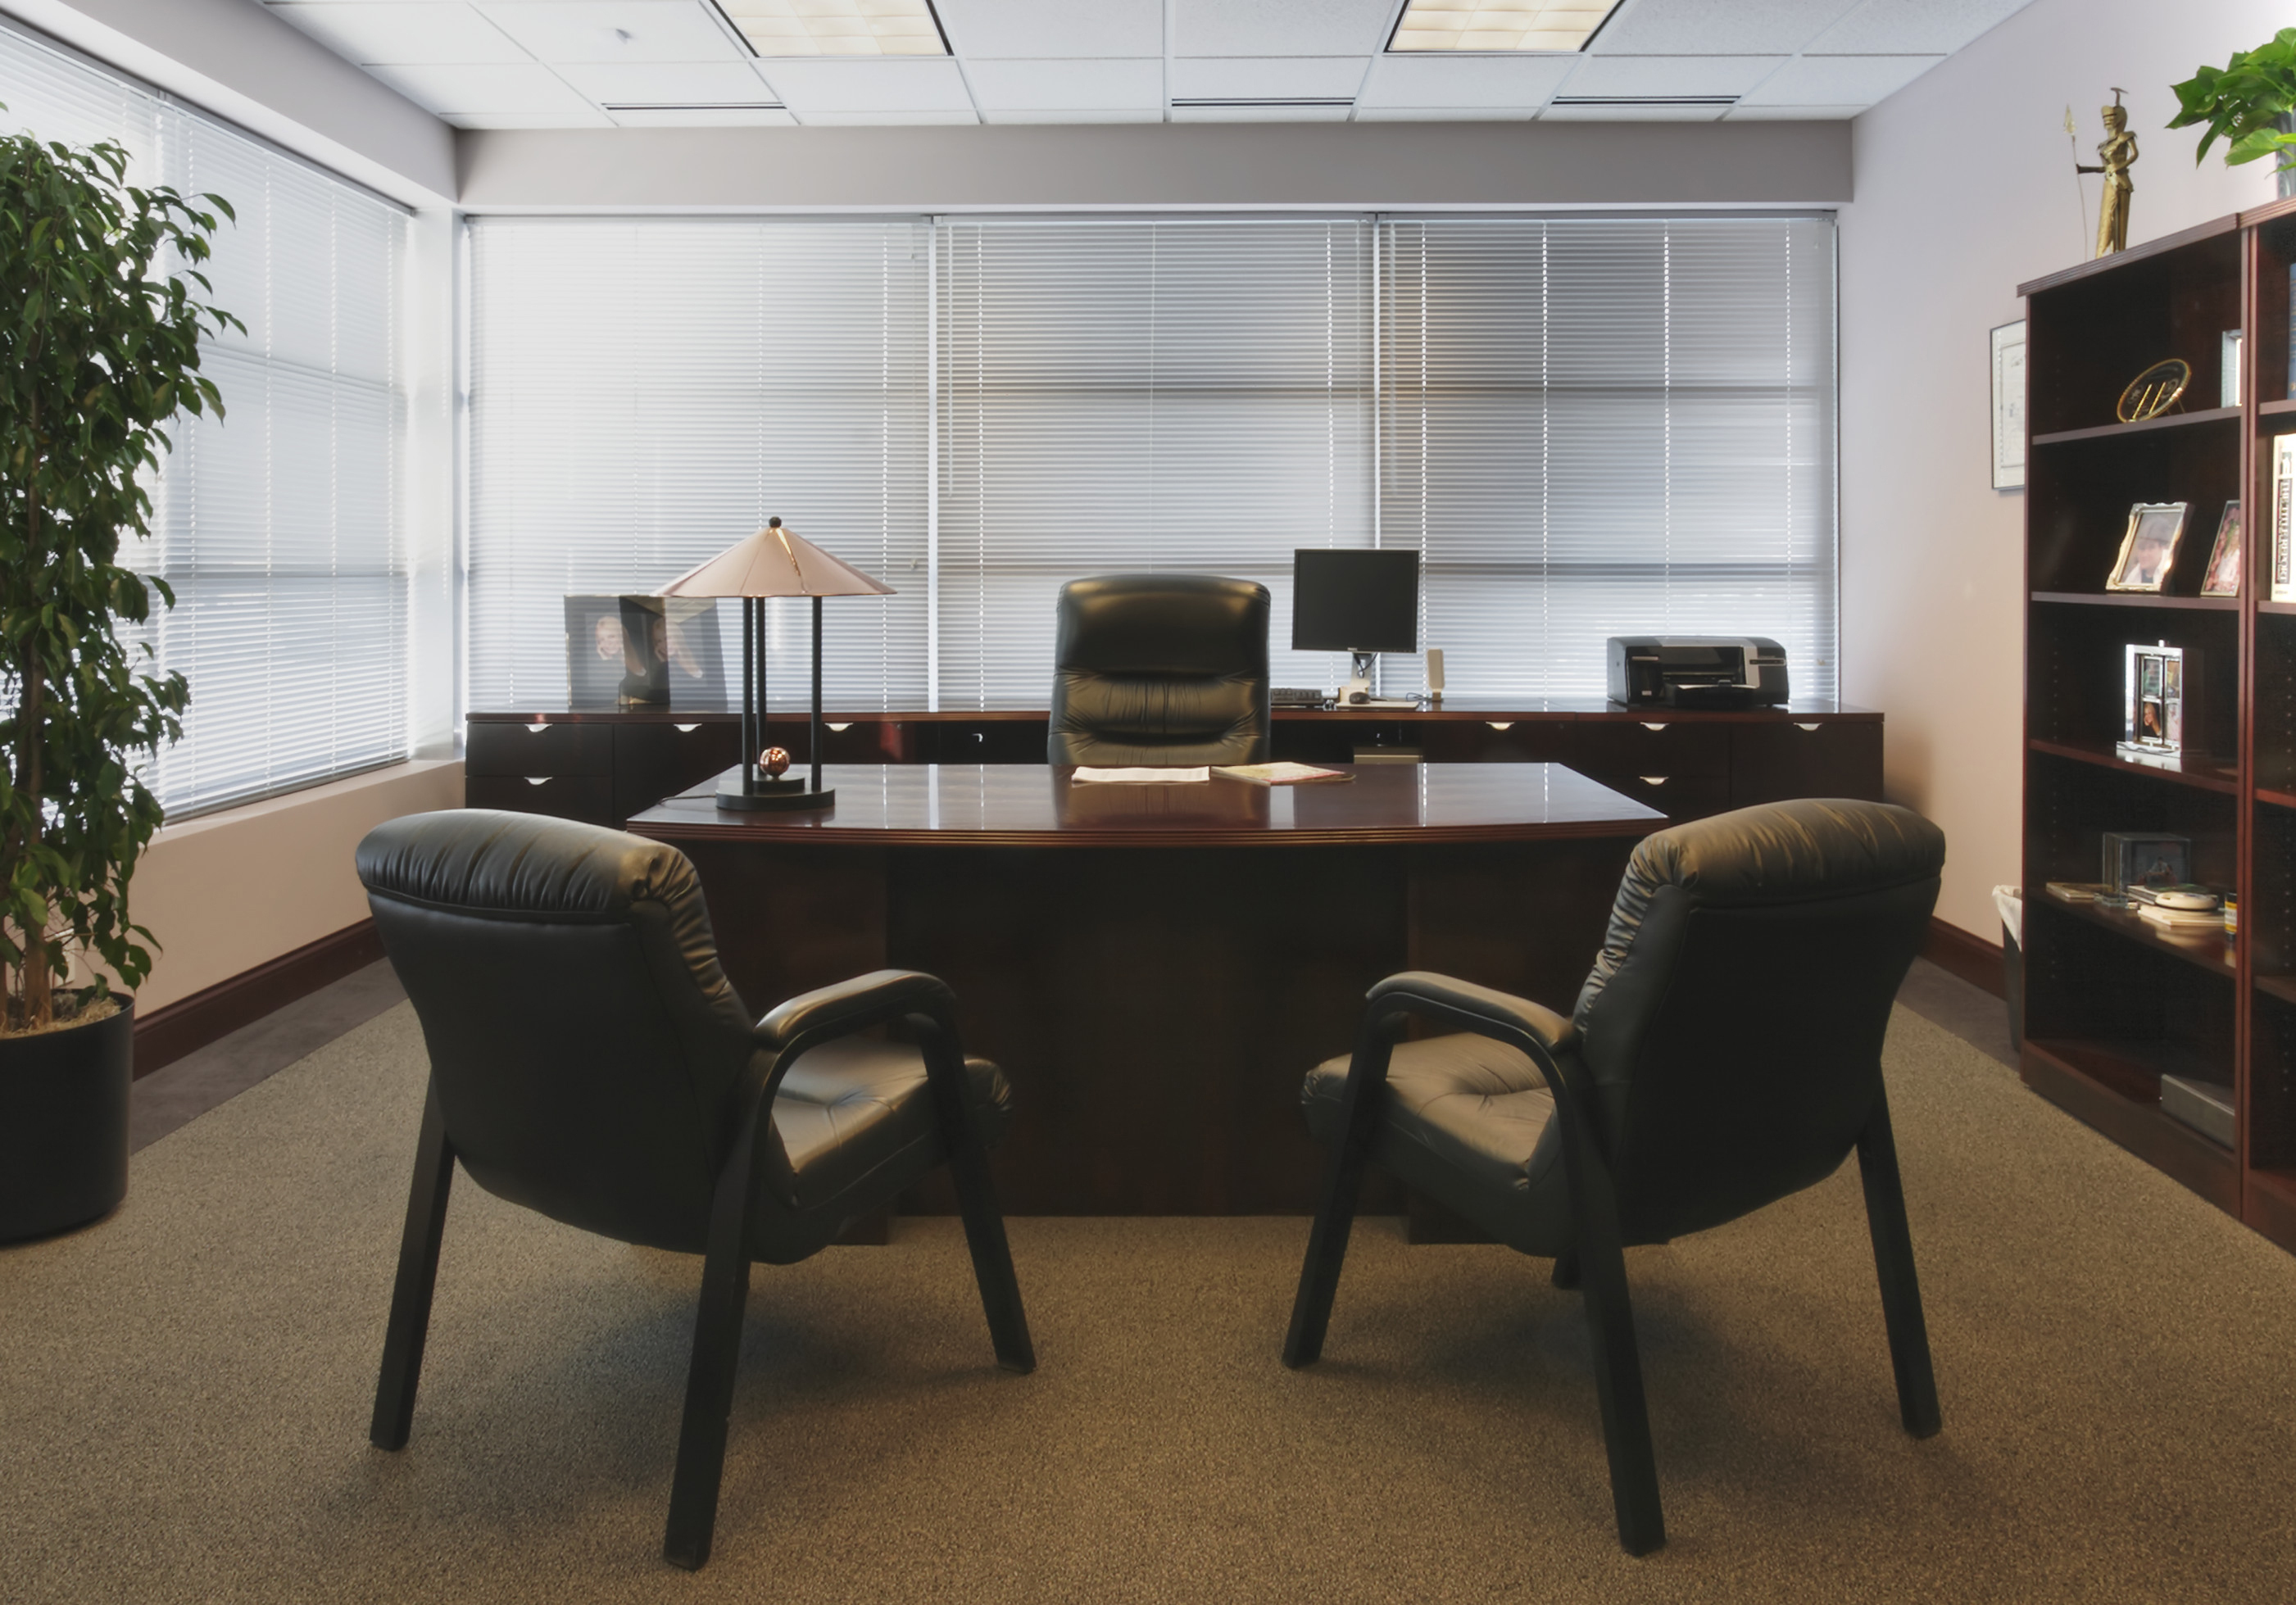 Manager's office | Source: Shutterstock